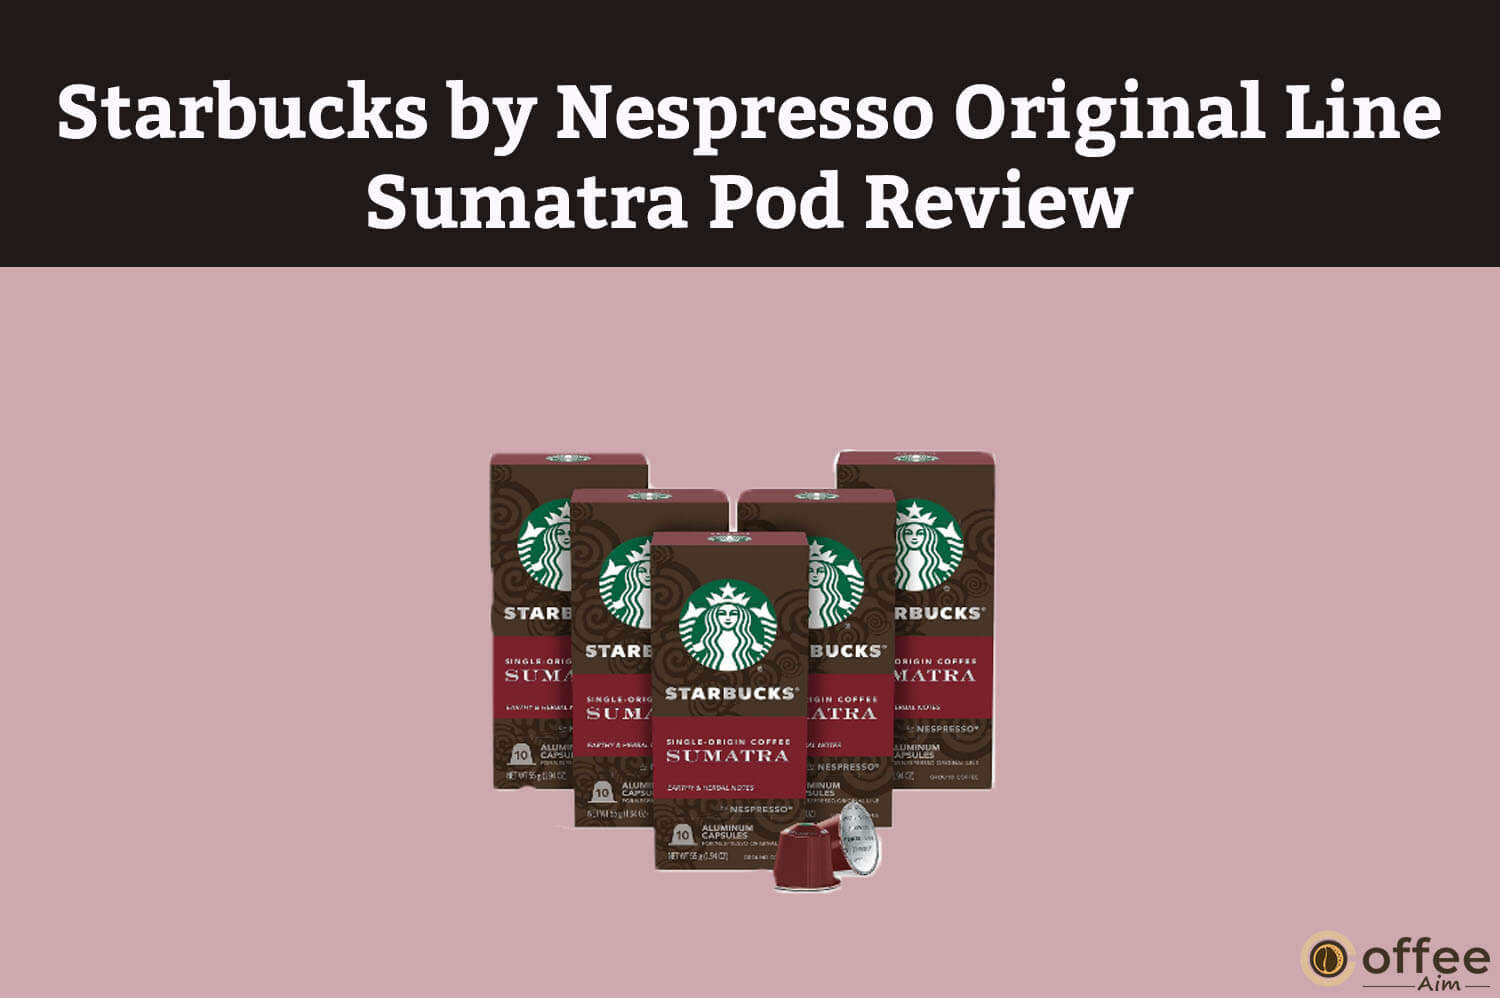 Feature image for the article "Starbucks by Nespresso Original Line Sumatra Pod Review"